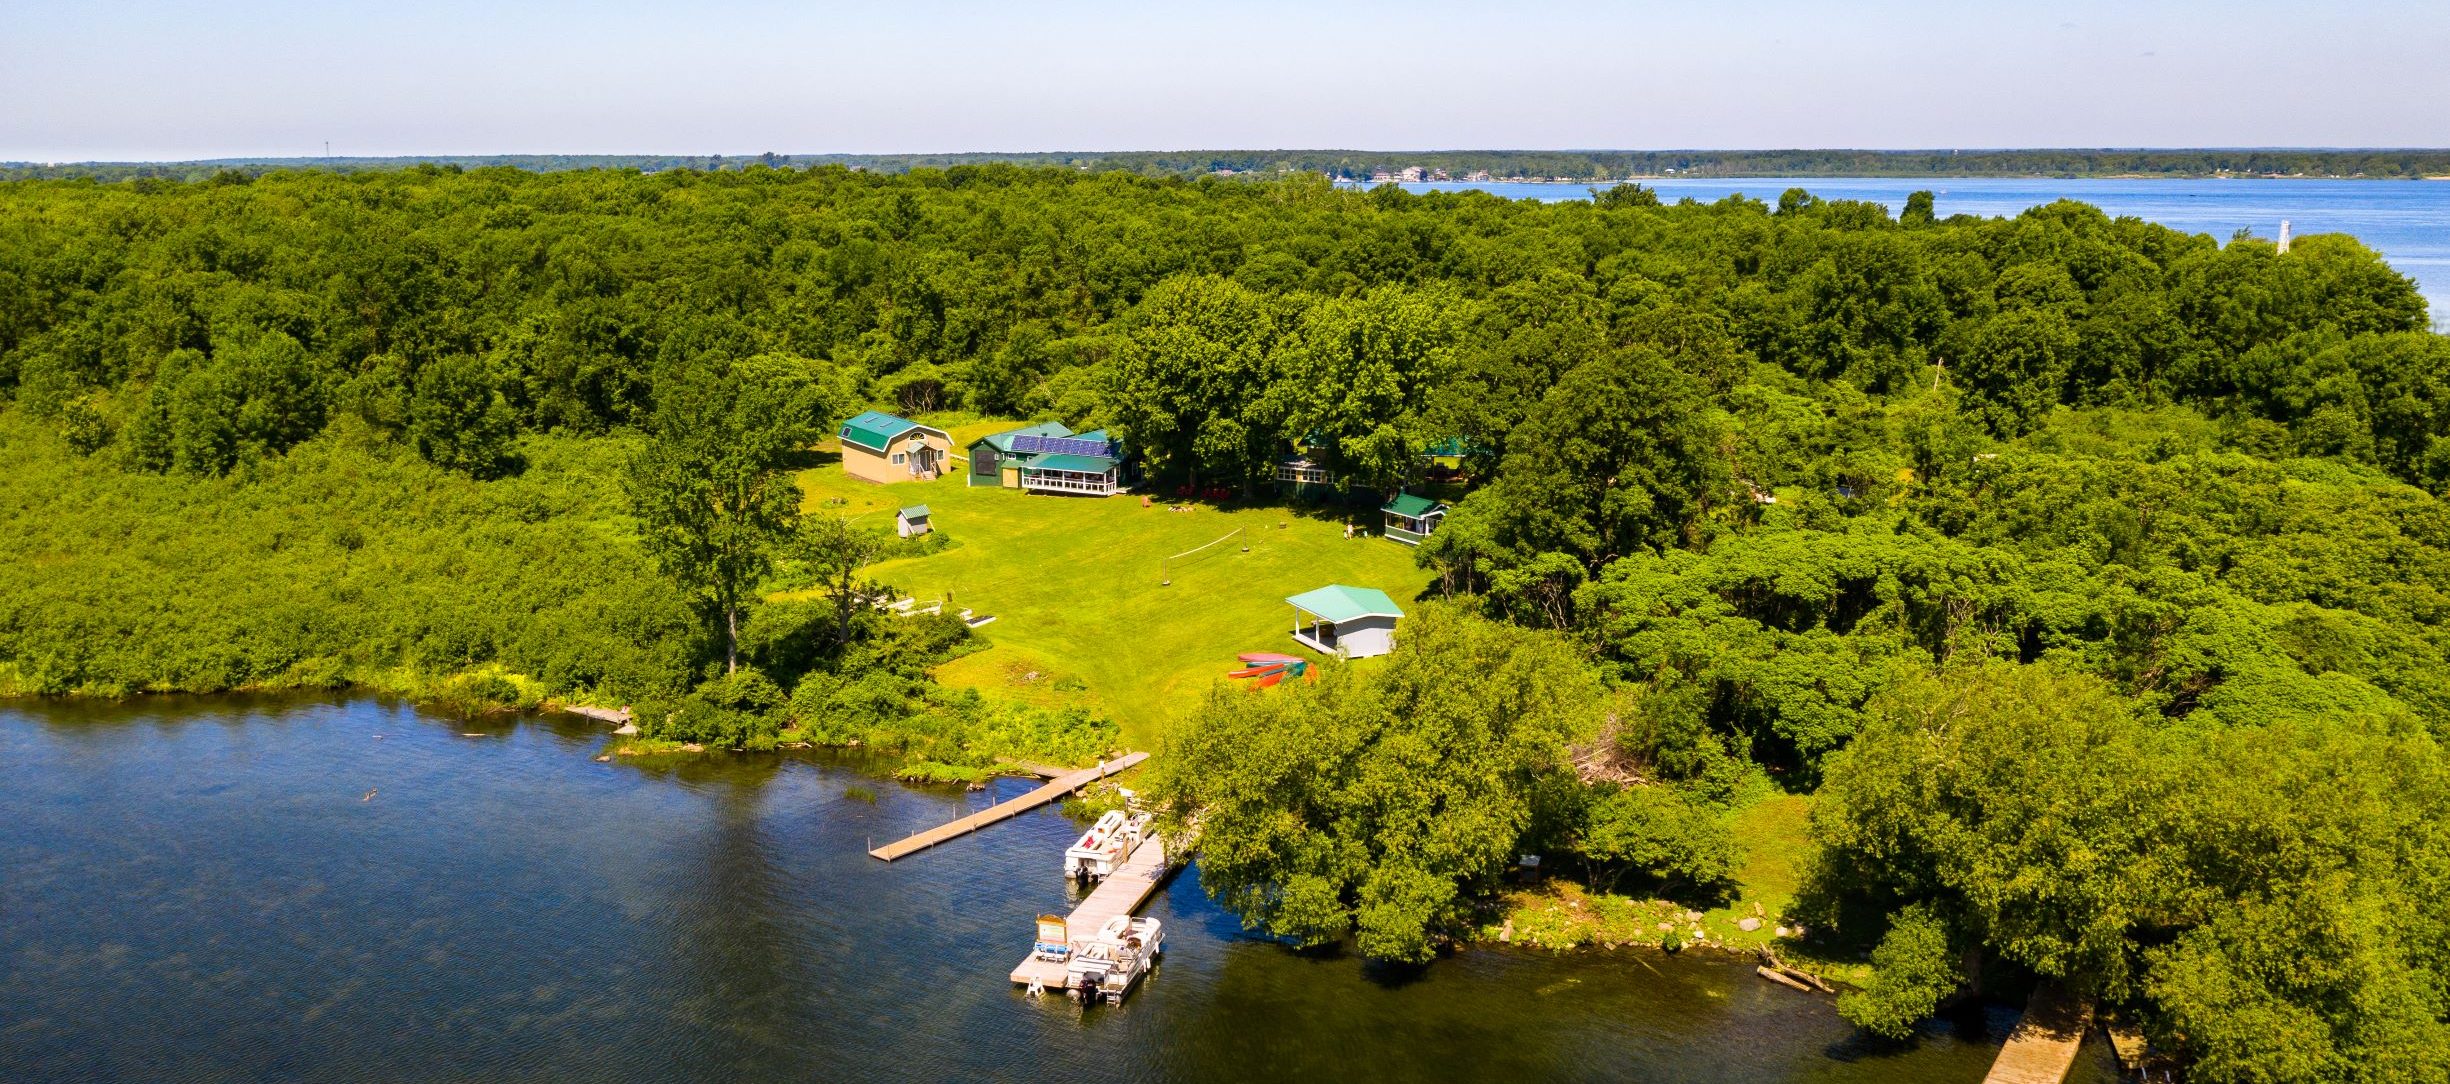 Set on a verdant island in the St. Lawrence River, the Thompson Island Cultural Camp is an immersive, multifunctional facility offering a unique view of Akwesasne. The eco-cultural camp connects visitors with nature and Akwesasne culture in a tranquil setting.